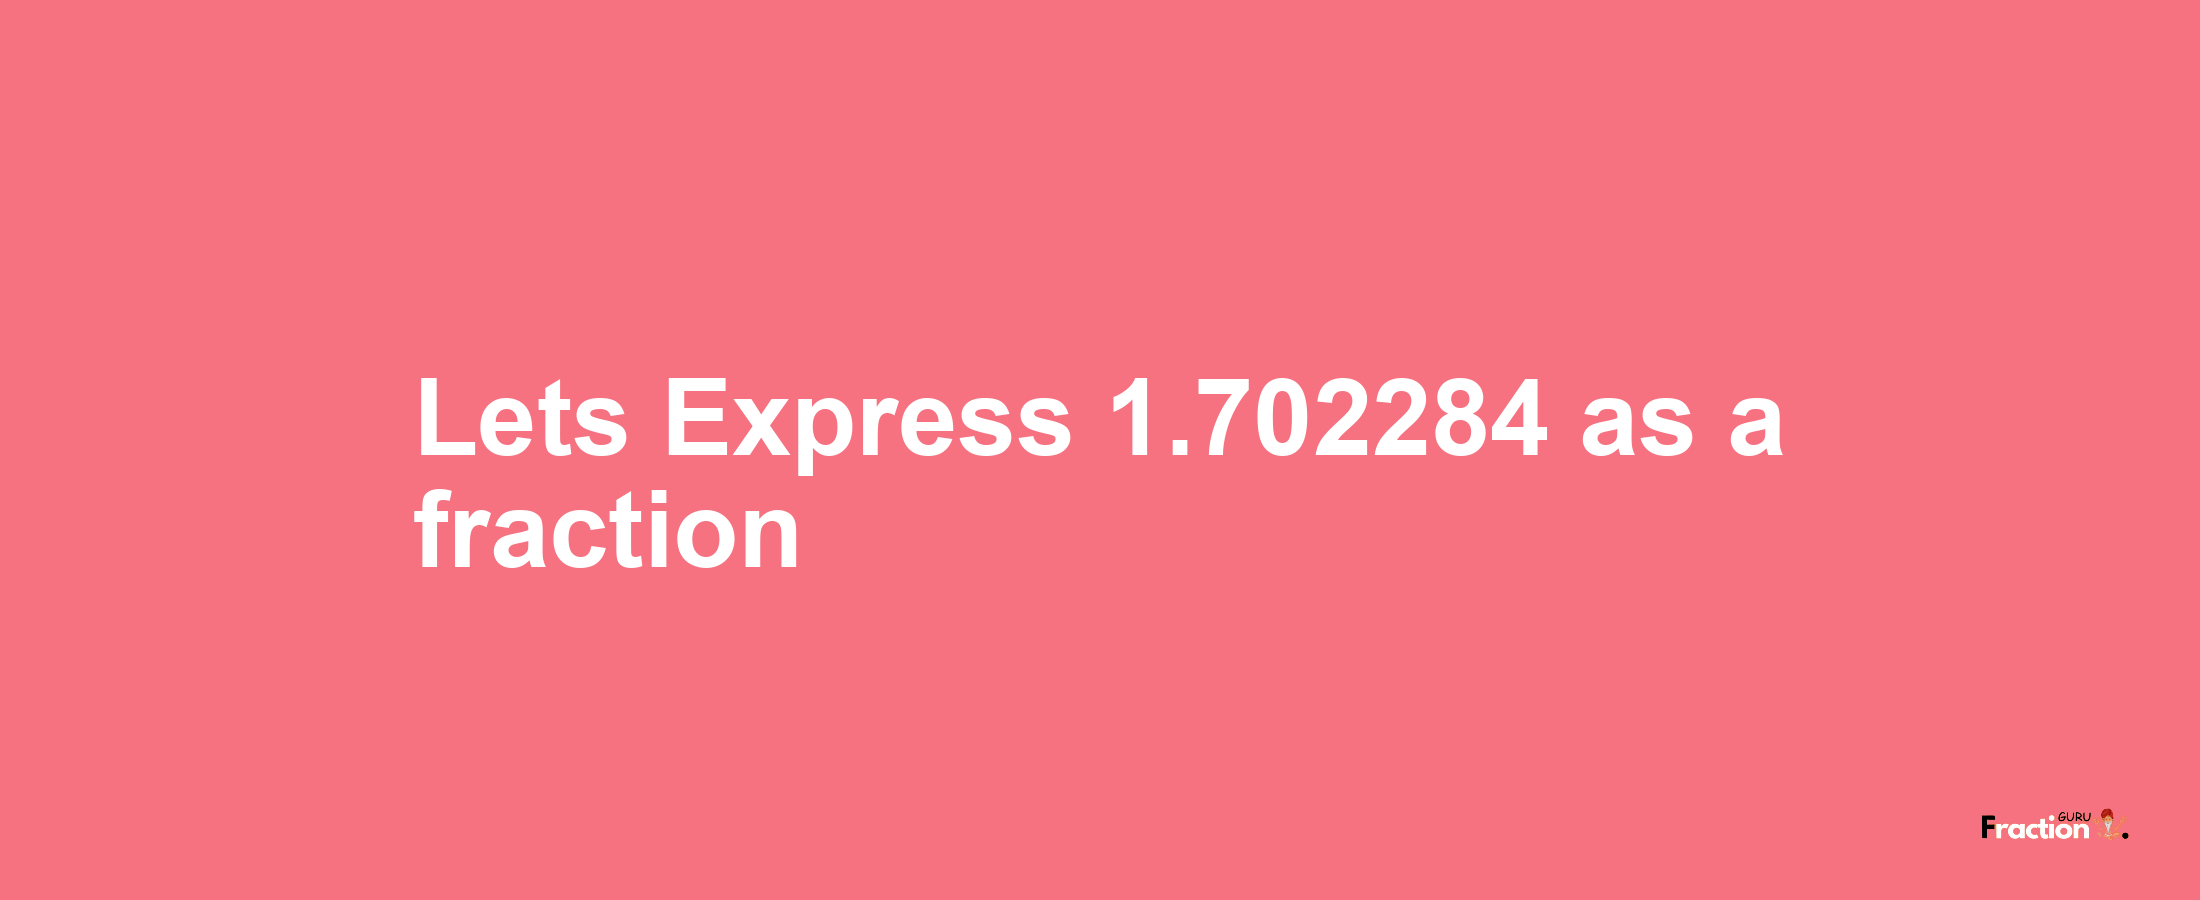 Lets Express 1.702284 as afraction